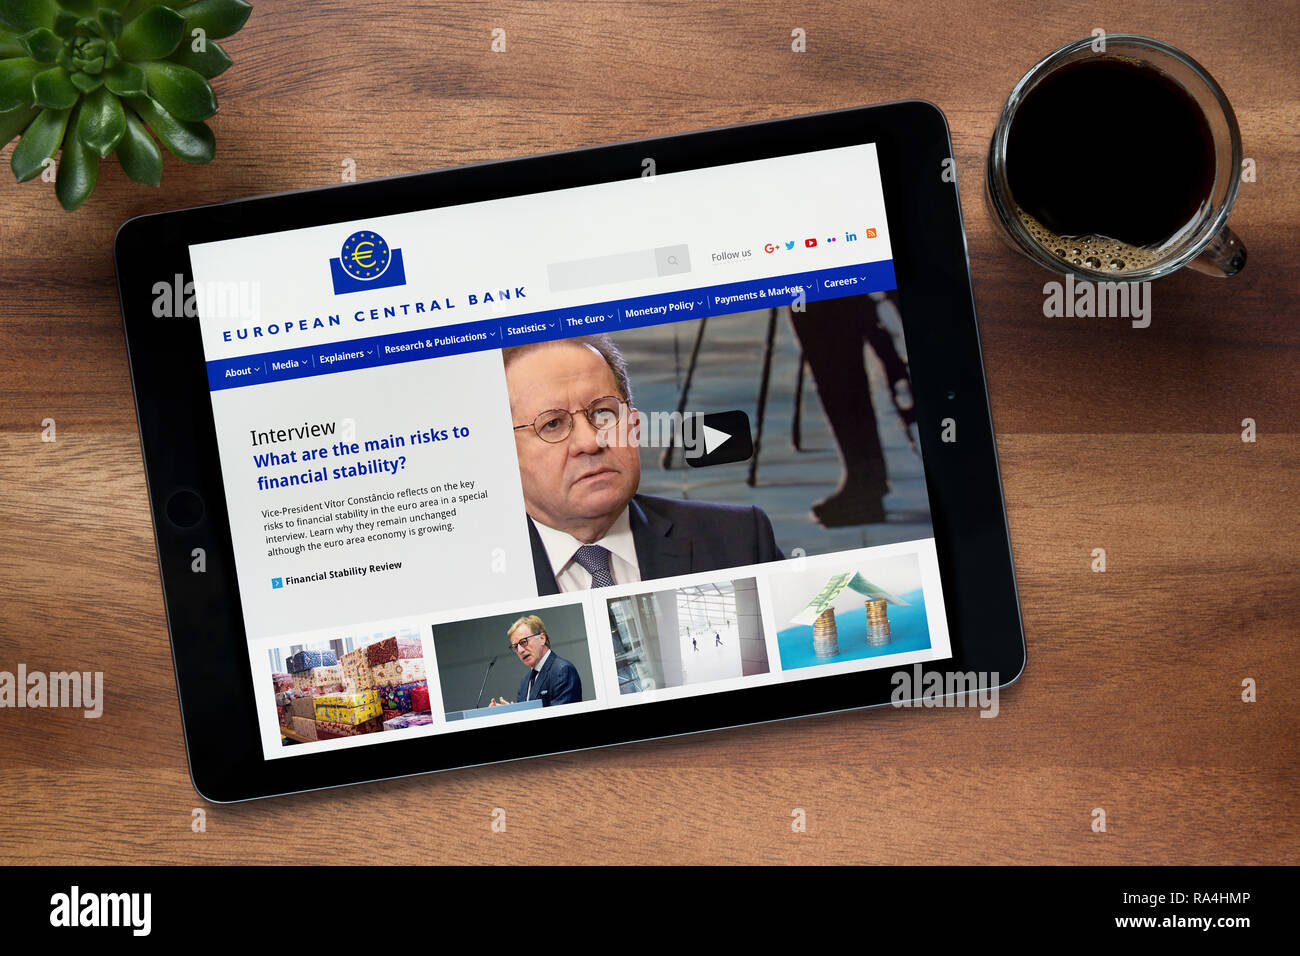 The website of European Central Bank is seen on an iPad tablet, on a wooden table along with an espresso coffee and a house plant (Editorial use only) Stock Photo